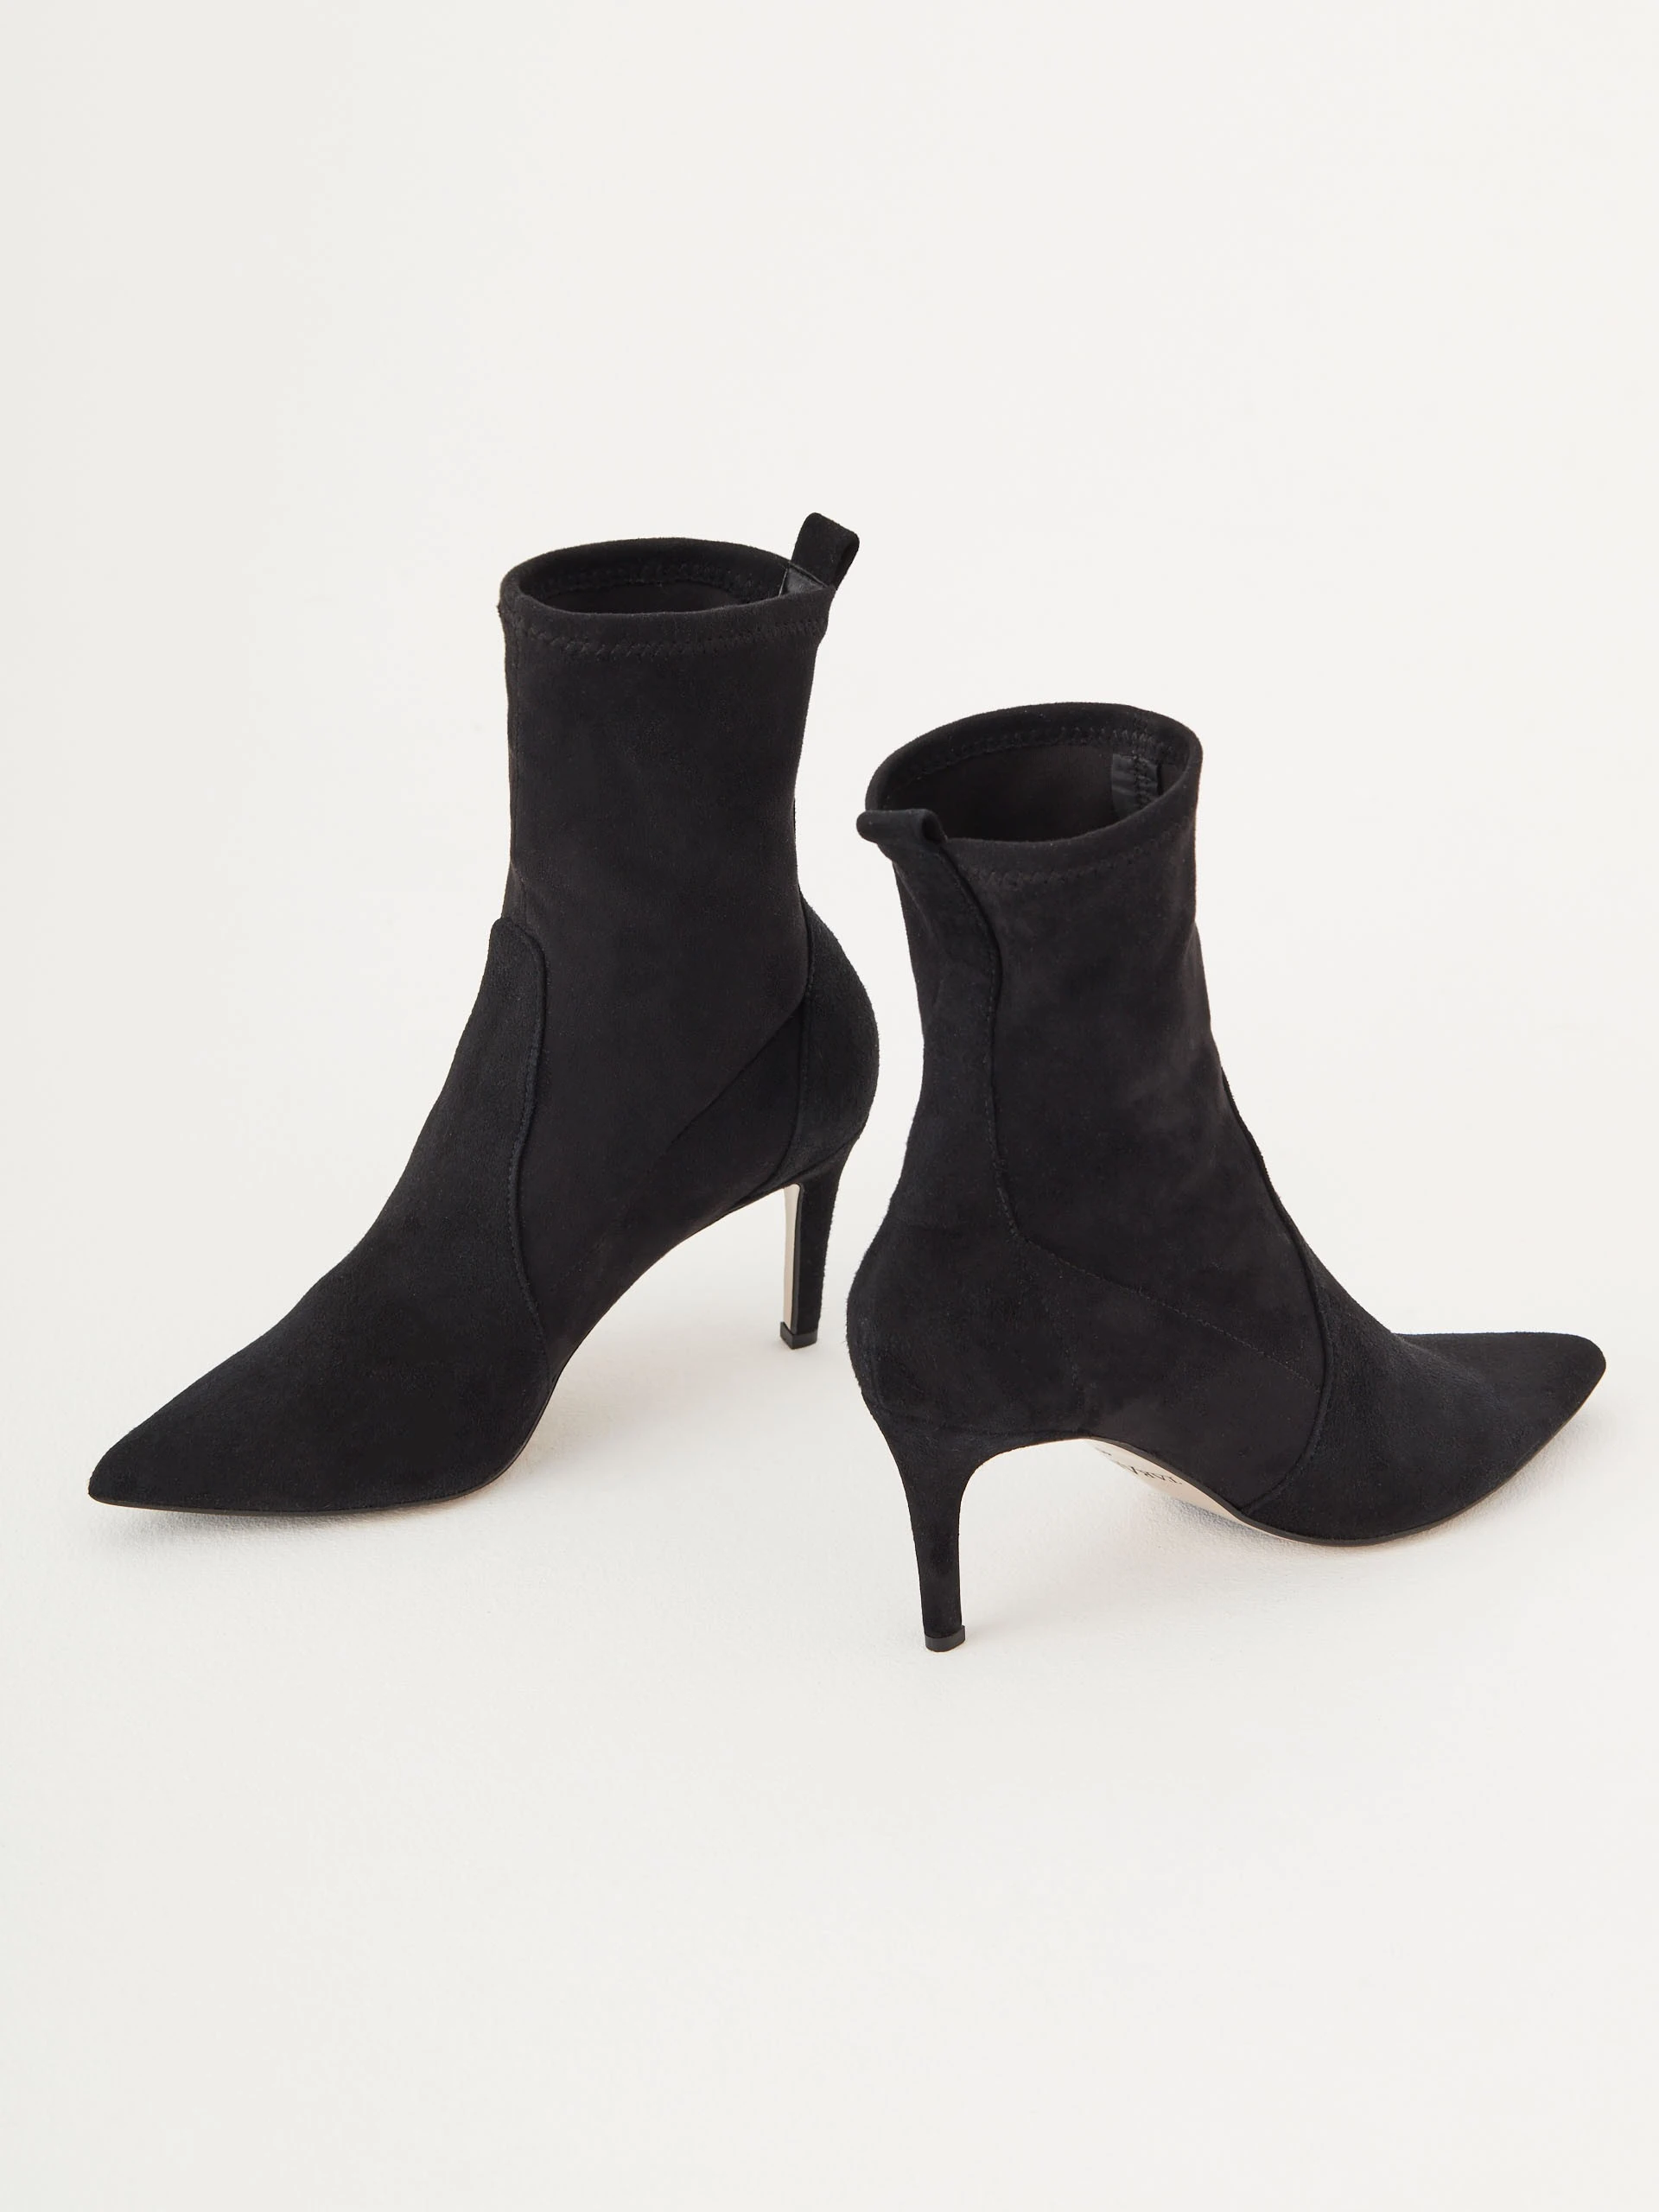 Black suede heeled boots